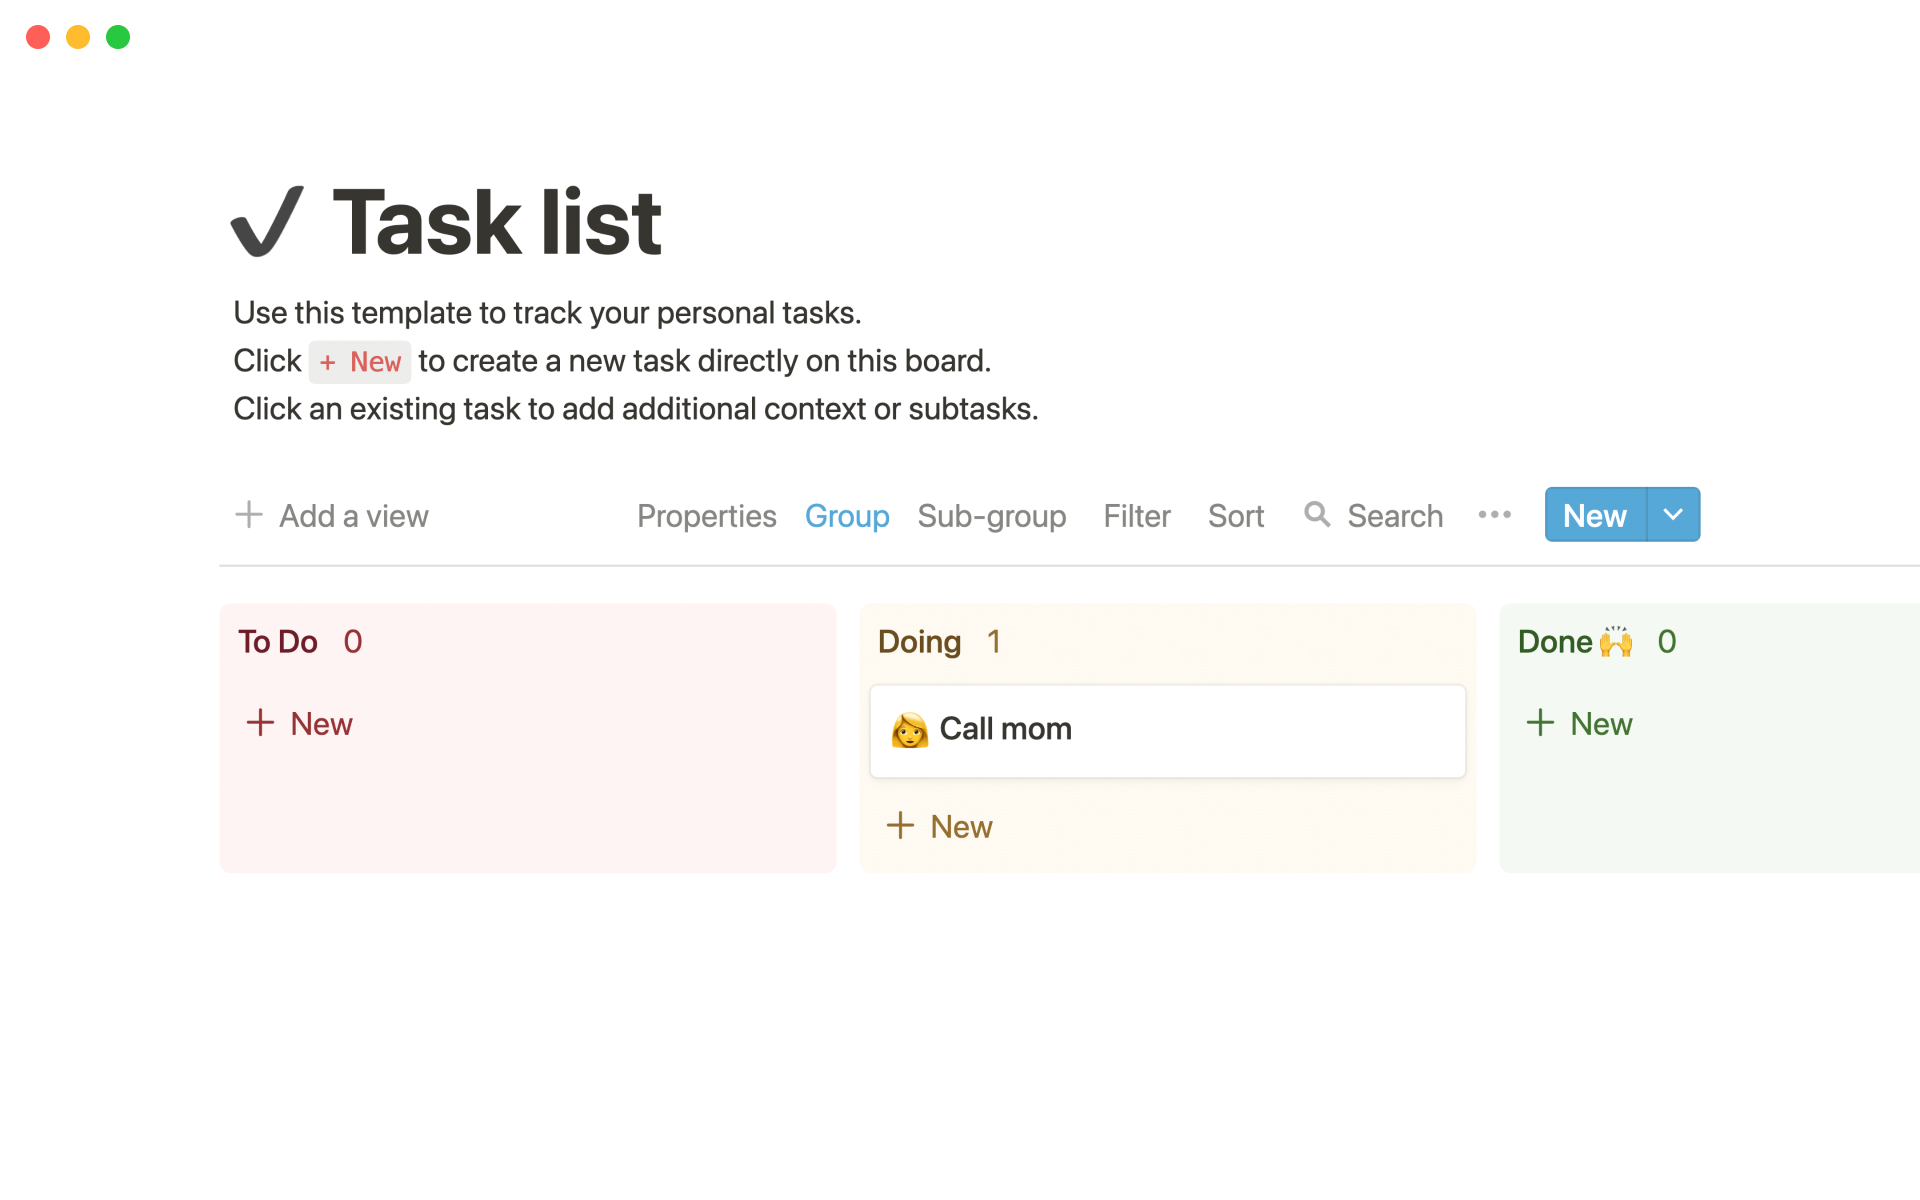 The desktop image for the Task list template